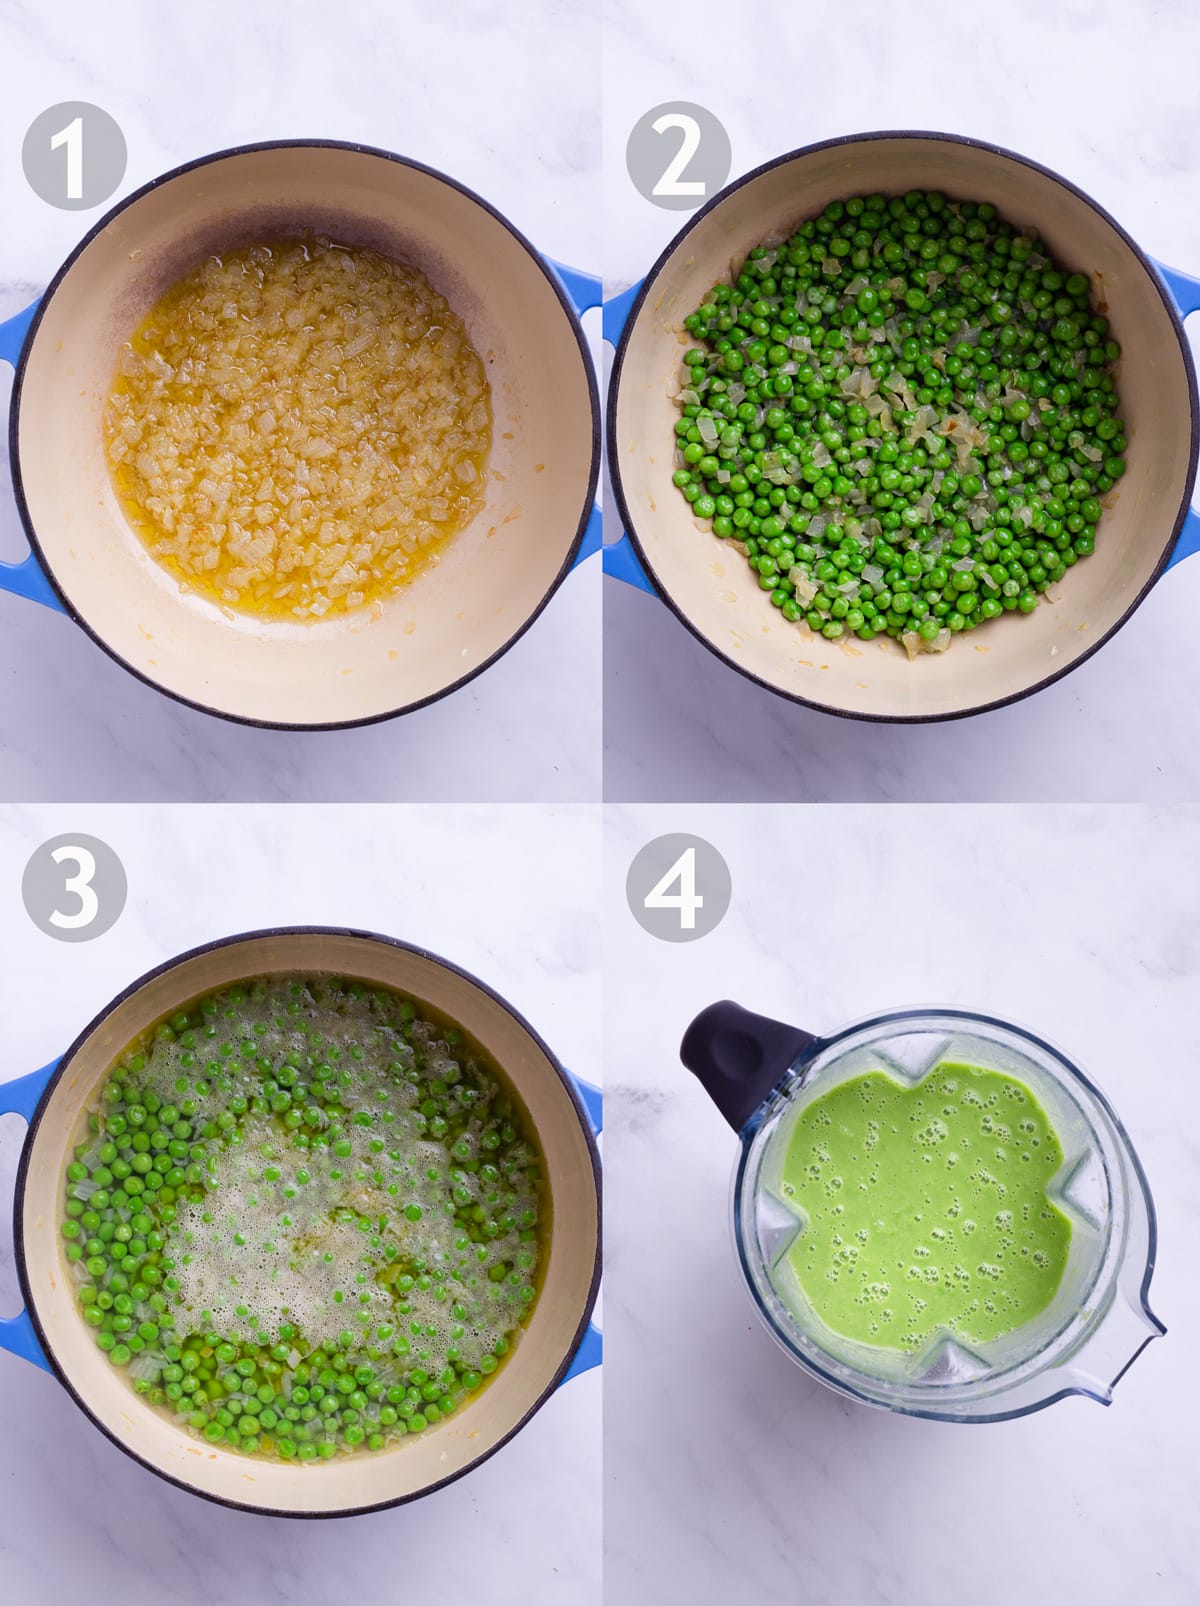 Side-by-side photos showing steps to make soup, including sautéing onion, adding peas, boiling with water and pureeing in a blender.